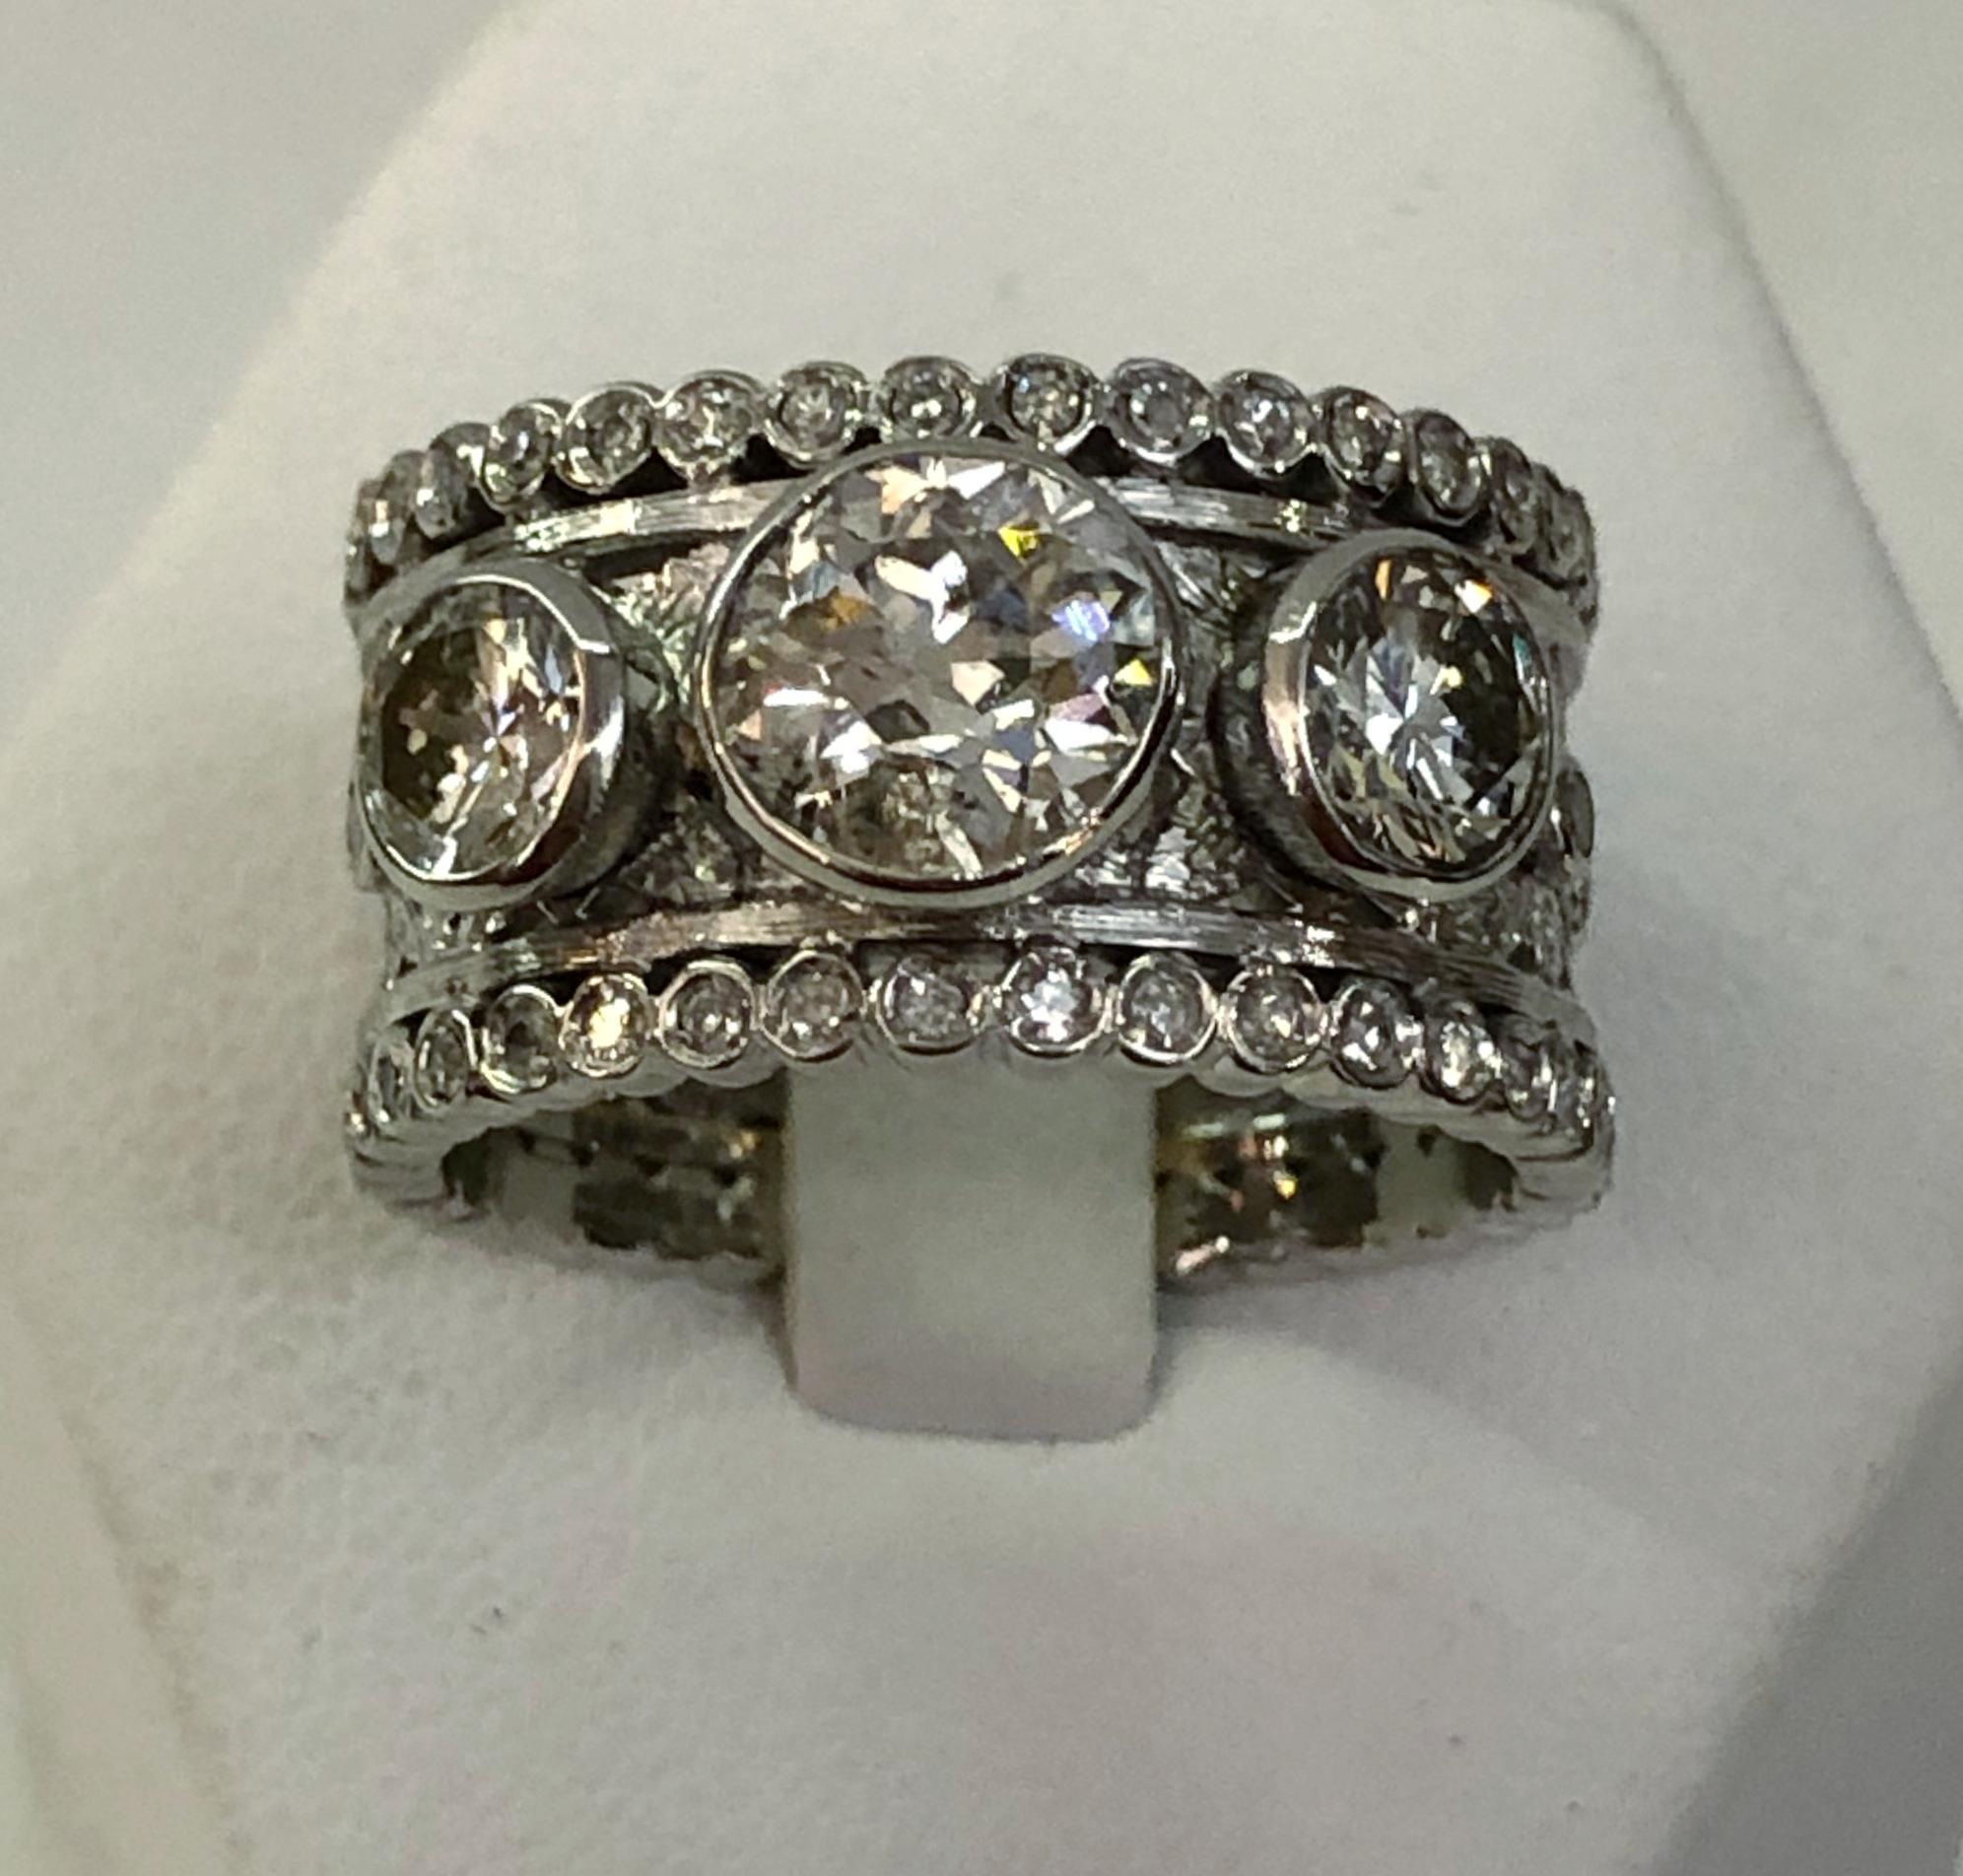 18 karat white gold band ring with three central diamonds for a total of 2.2 karats and small brilliant diamonds on the stem / made in Italy by Buccellati, 1960-1980s
Ring size US 7.5